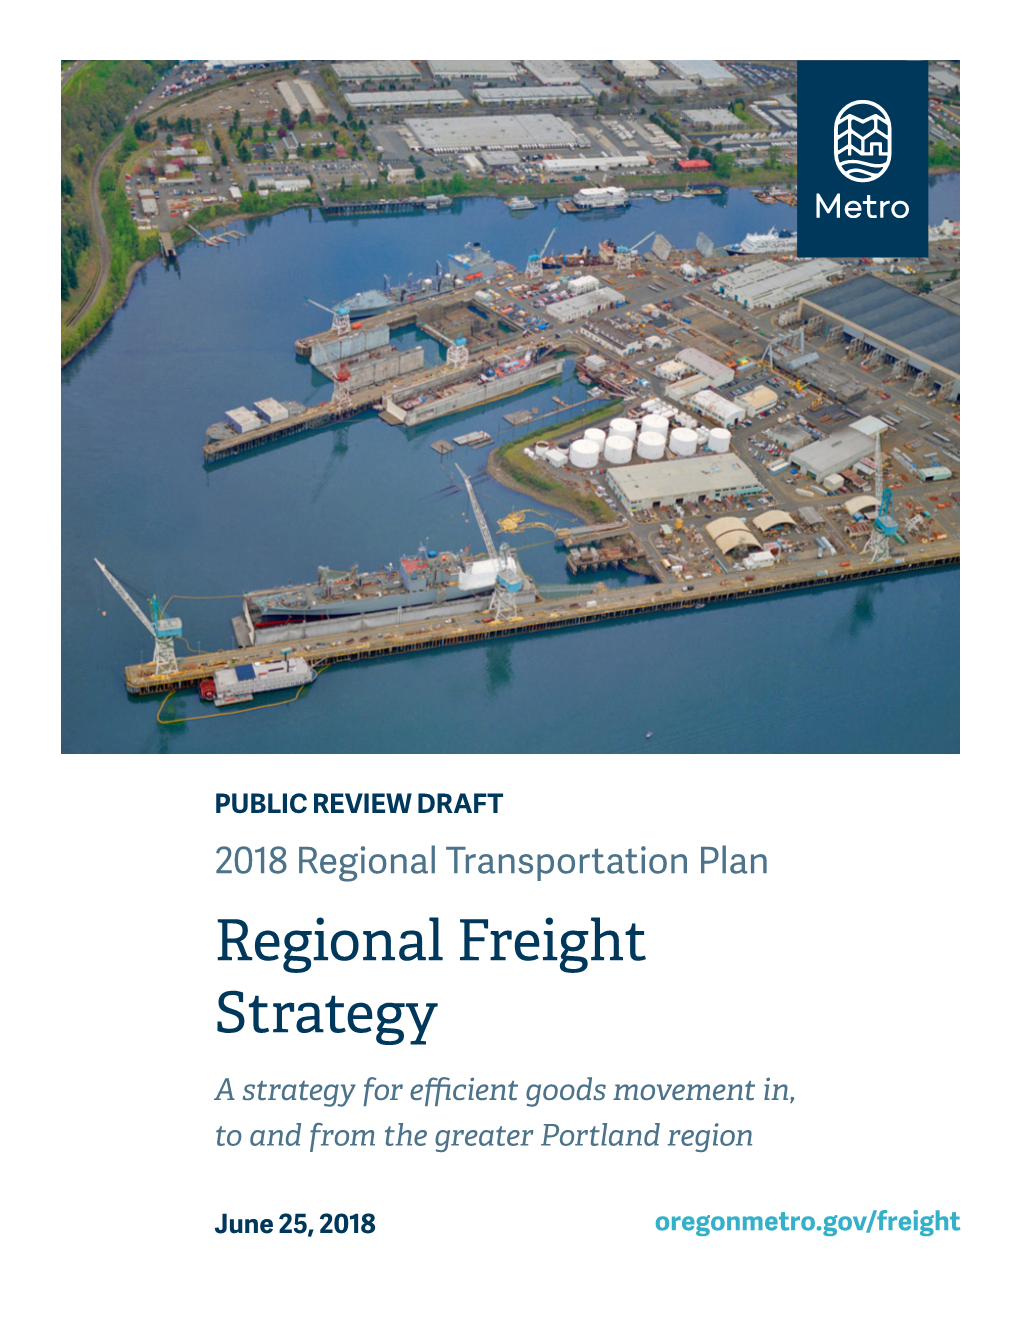 Regional Freight Strategy a Strategy for Efficient Goods Movement In, to and from the Greater Portland Region